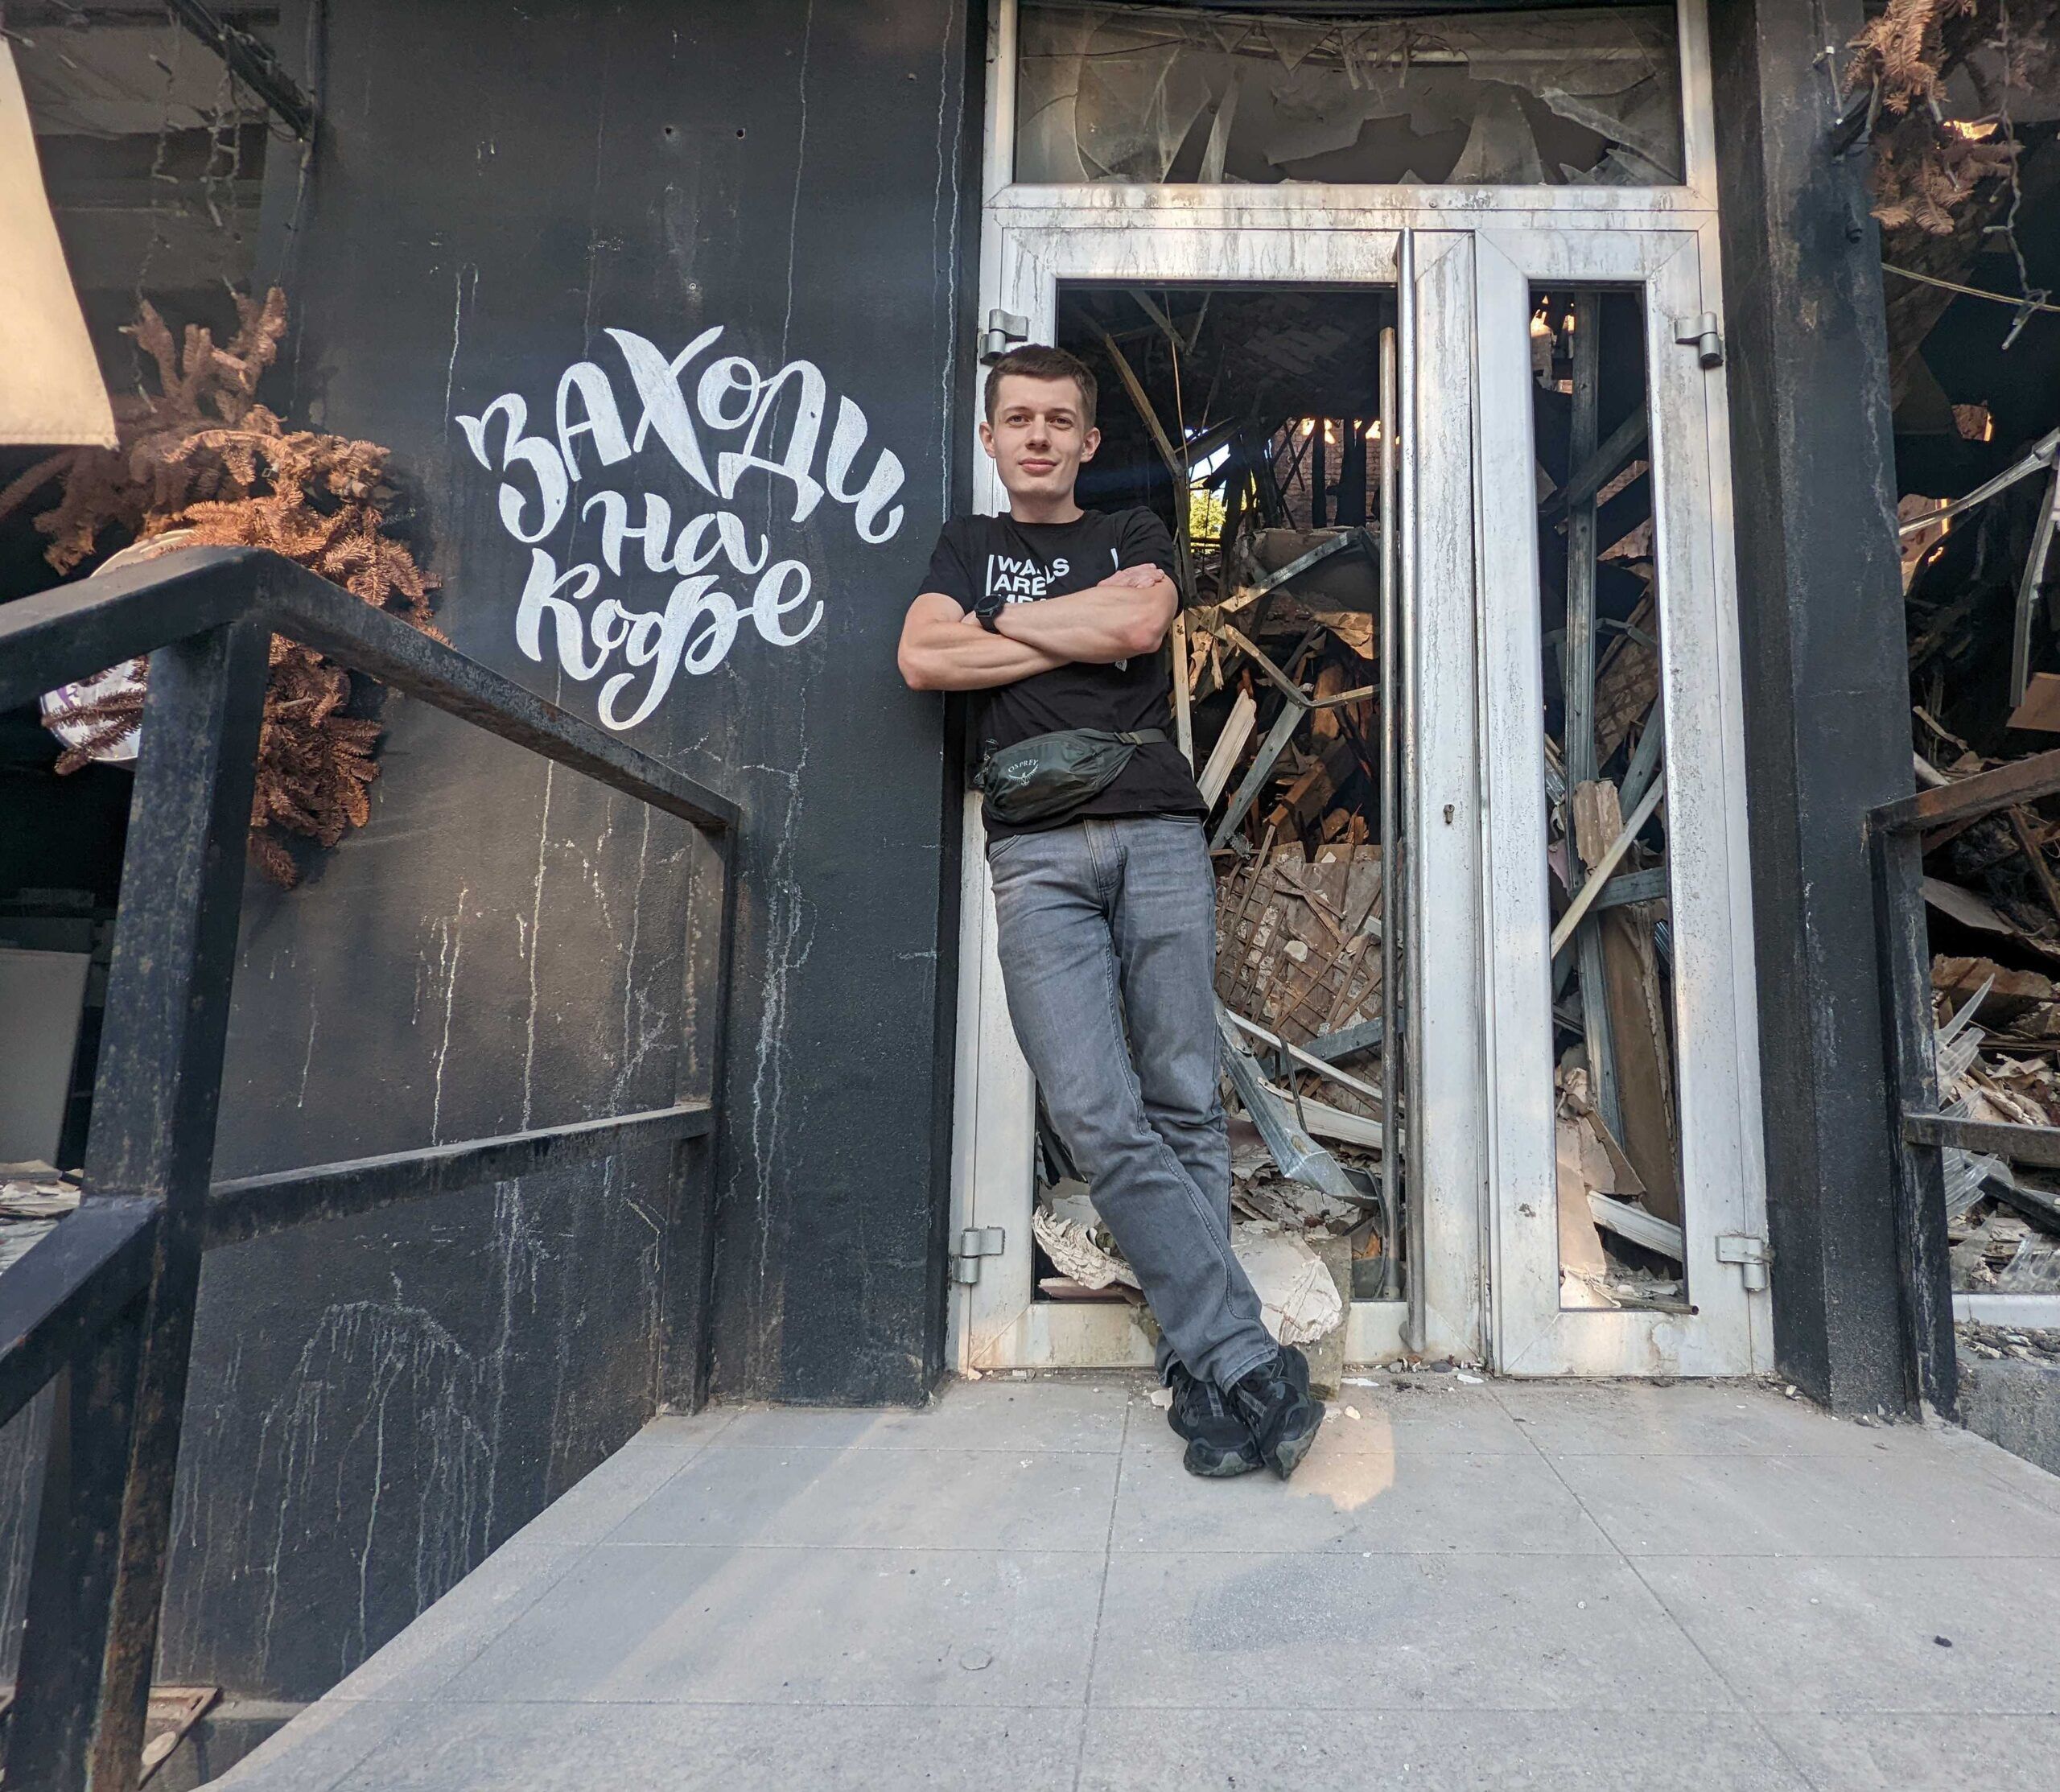 Denys Volokha returned to Kharkiv after months away to find the city destroyed but his work was just getting started.